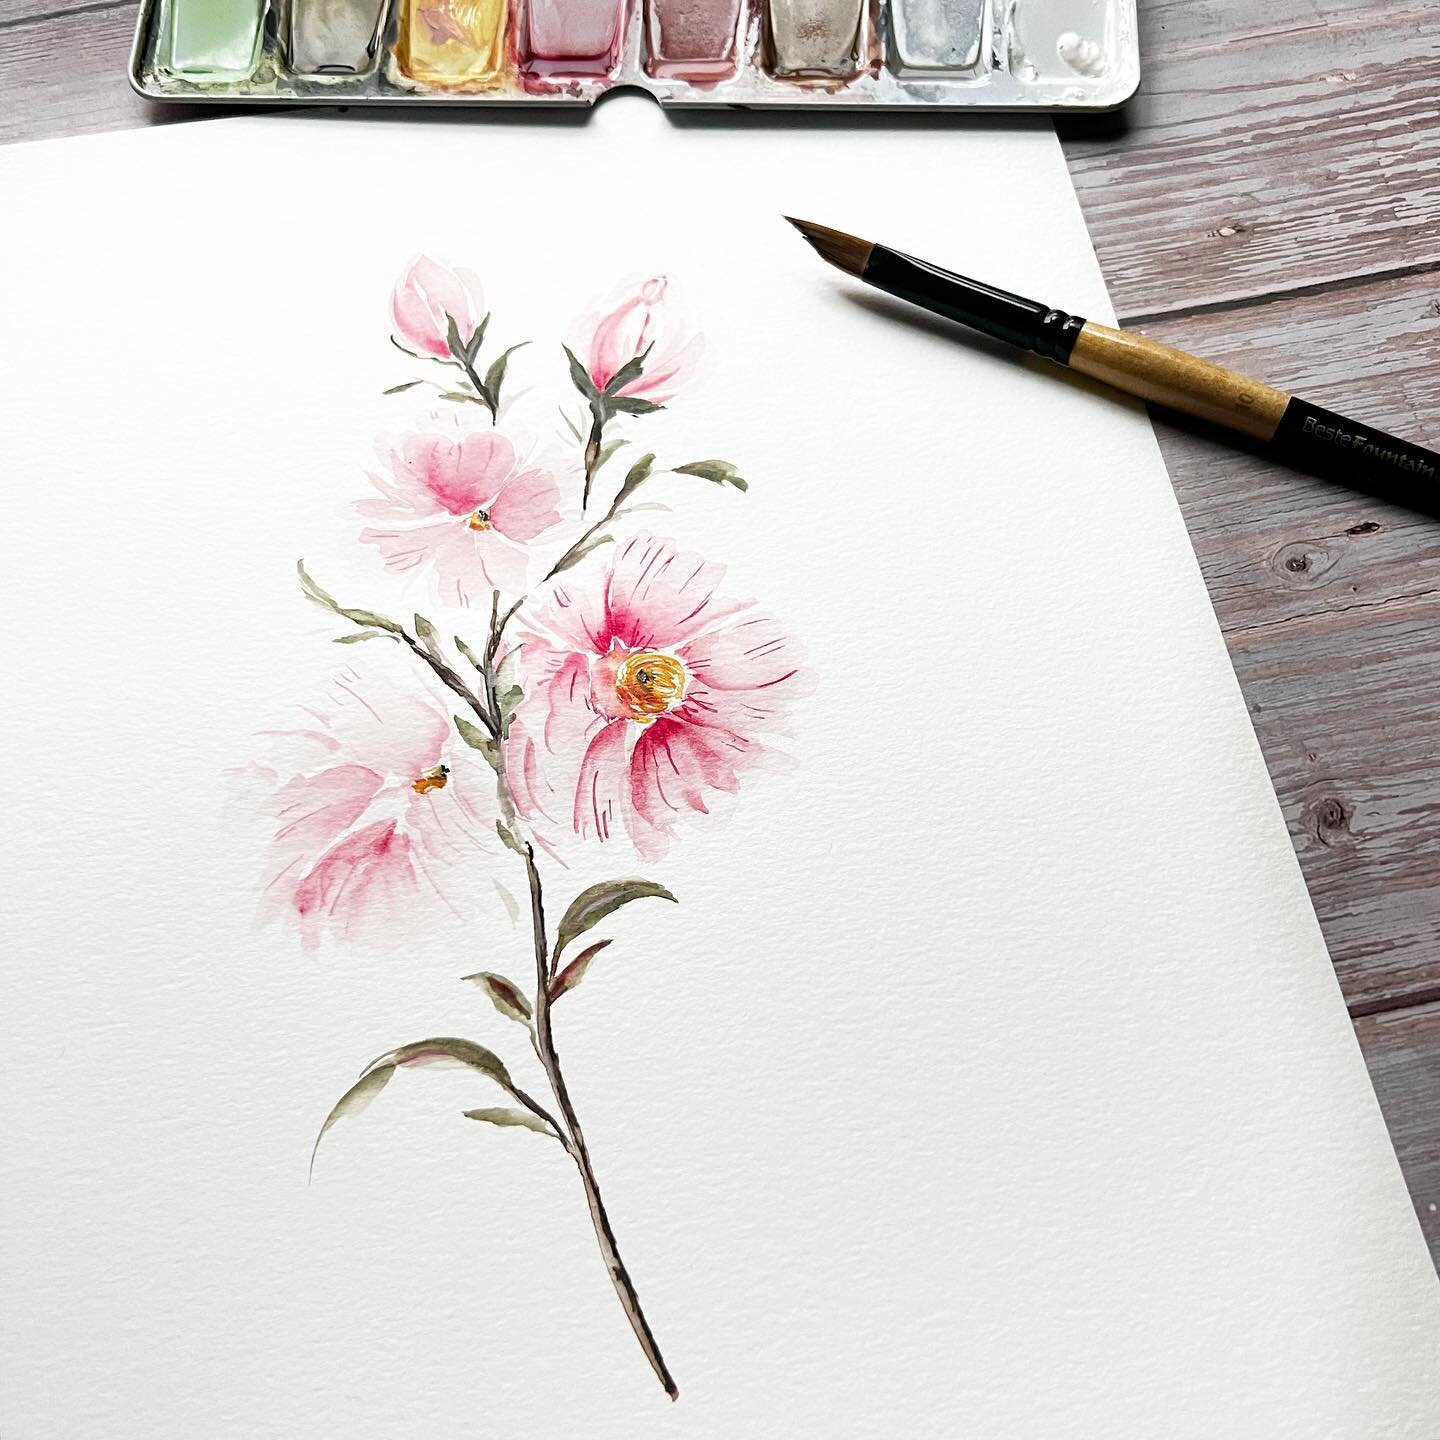 Wedge brush watercolor florals of some sort. I&rsquo;m a huge fan of quiet early morning practice before I tackle the to-do list. You too? ☕️ 🎨 📖 
⁣
⁣
#wedgebrush⁣ #watercolorpaintings #floralwatercolor 
⁣